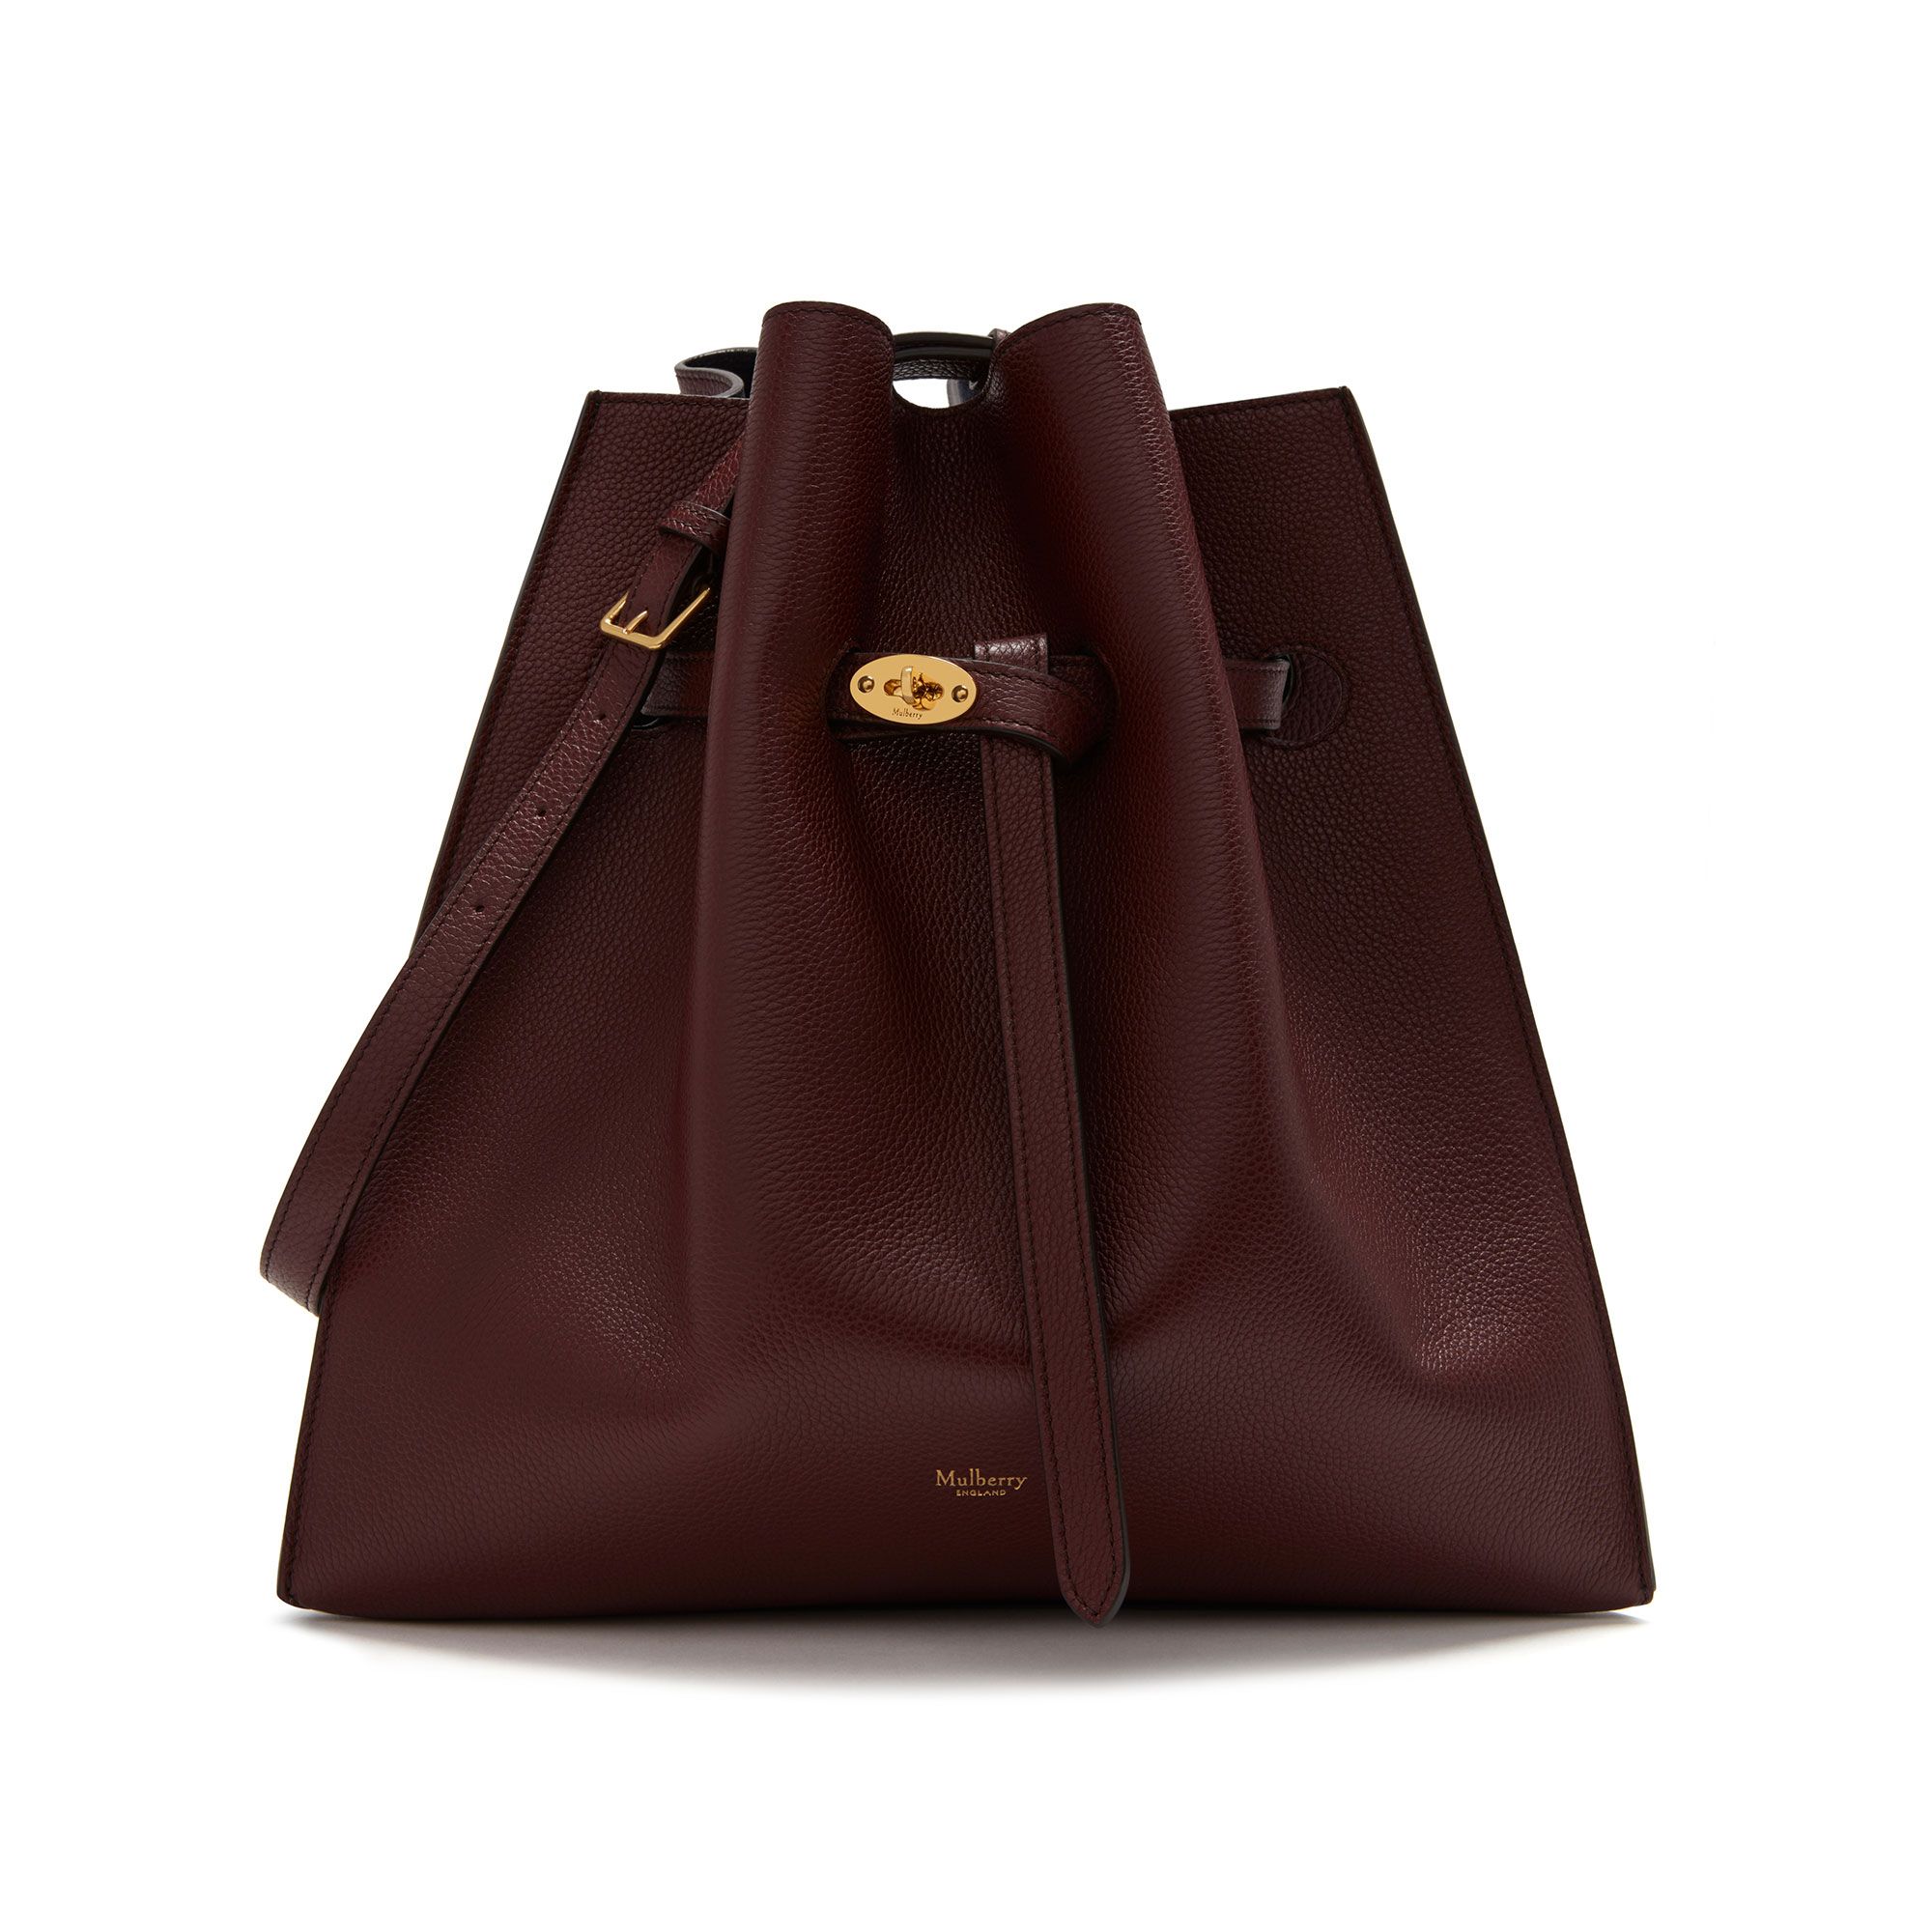 Mulberry – Carry Kind